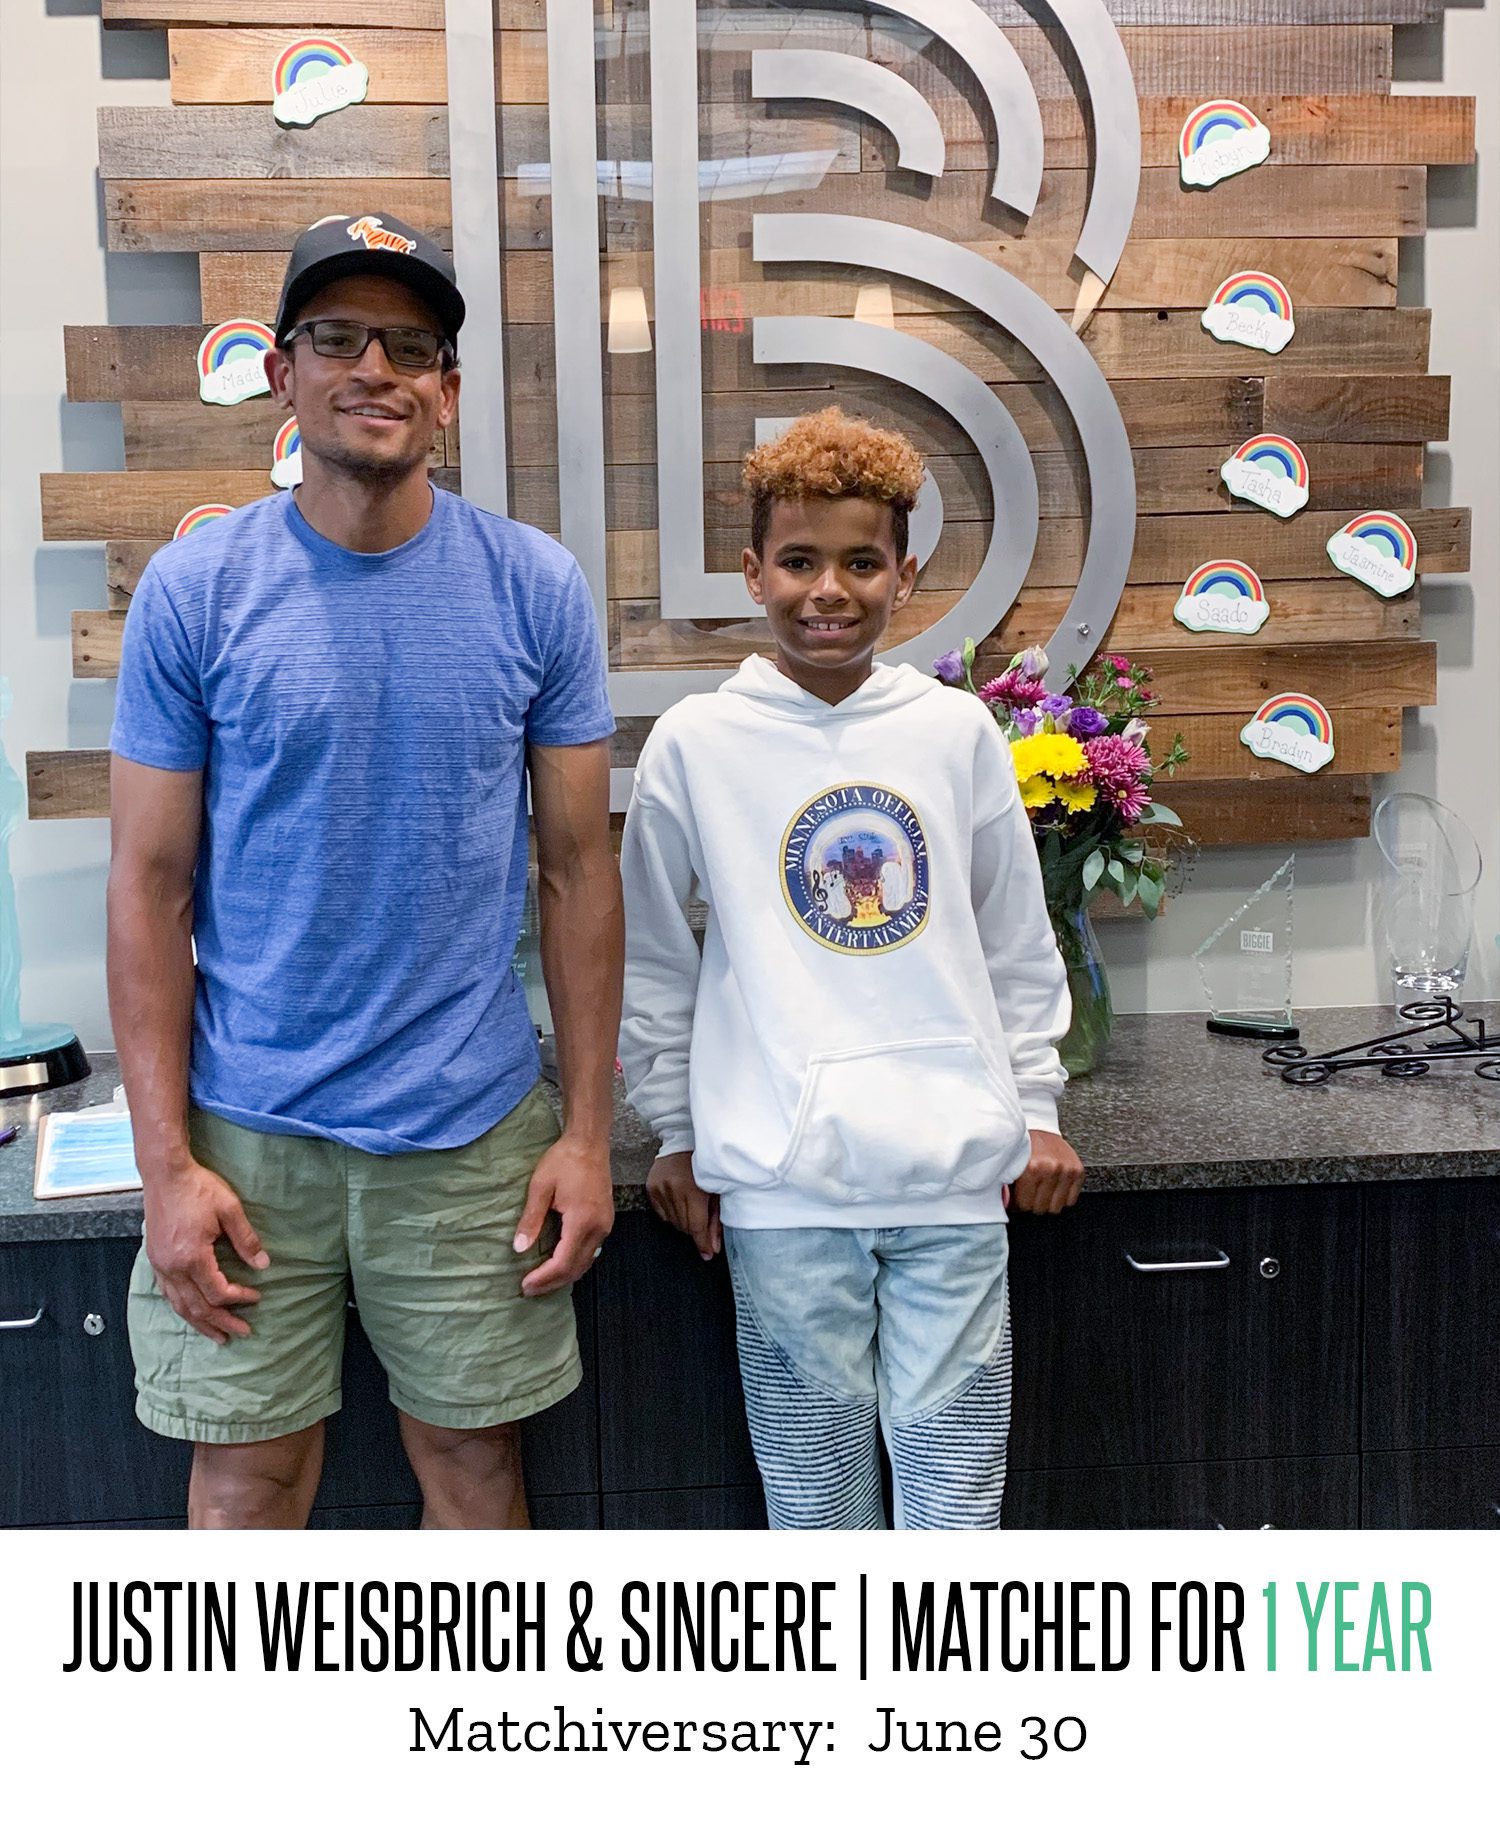 Justin and Sincere 1 Year Matchiversary